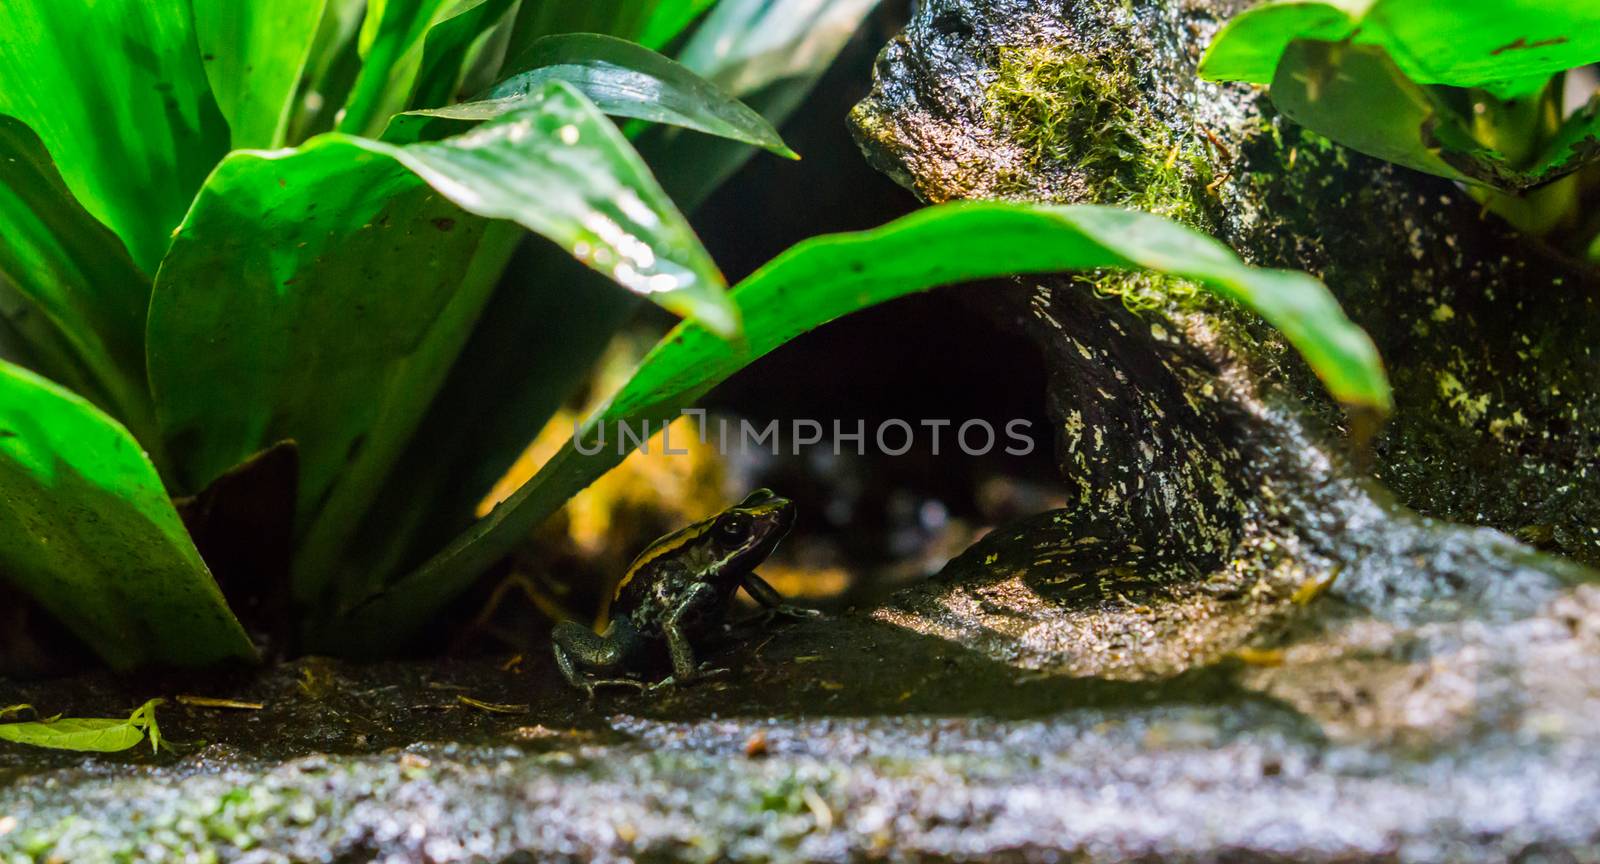 Golfodulcean poison dart frog sitting under a plant, a dangerous and venomous amphibian from Costa Rica